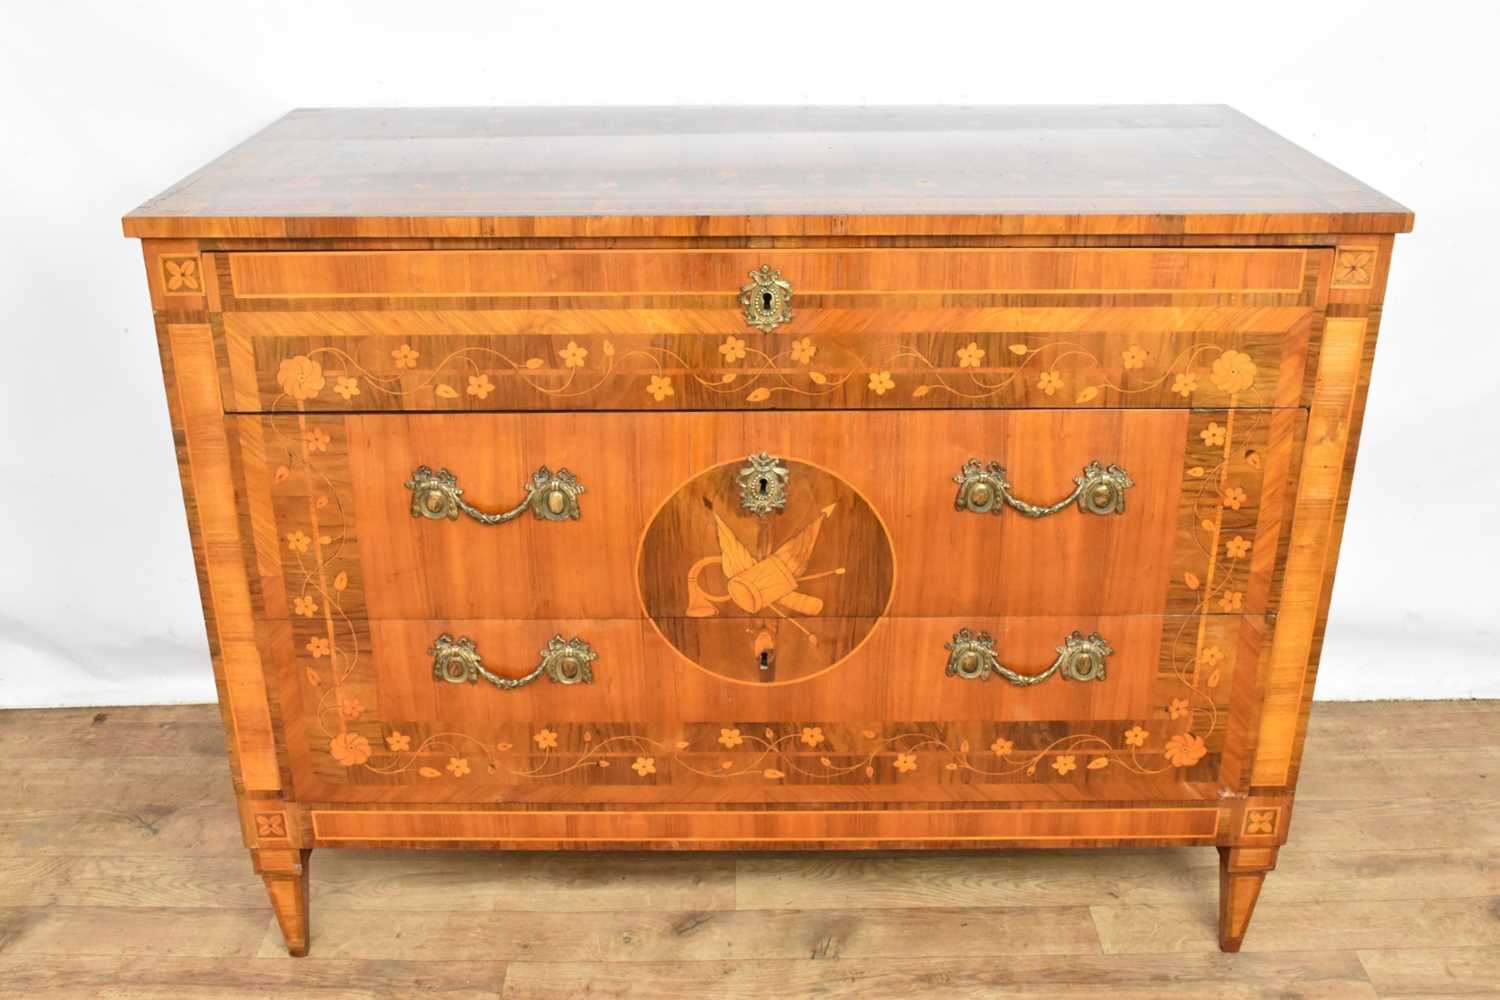 Late 18th century north Italian kingwood and marquetry inlaid commode - Image 2 of 21